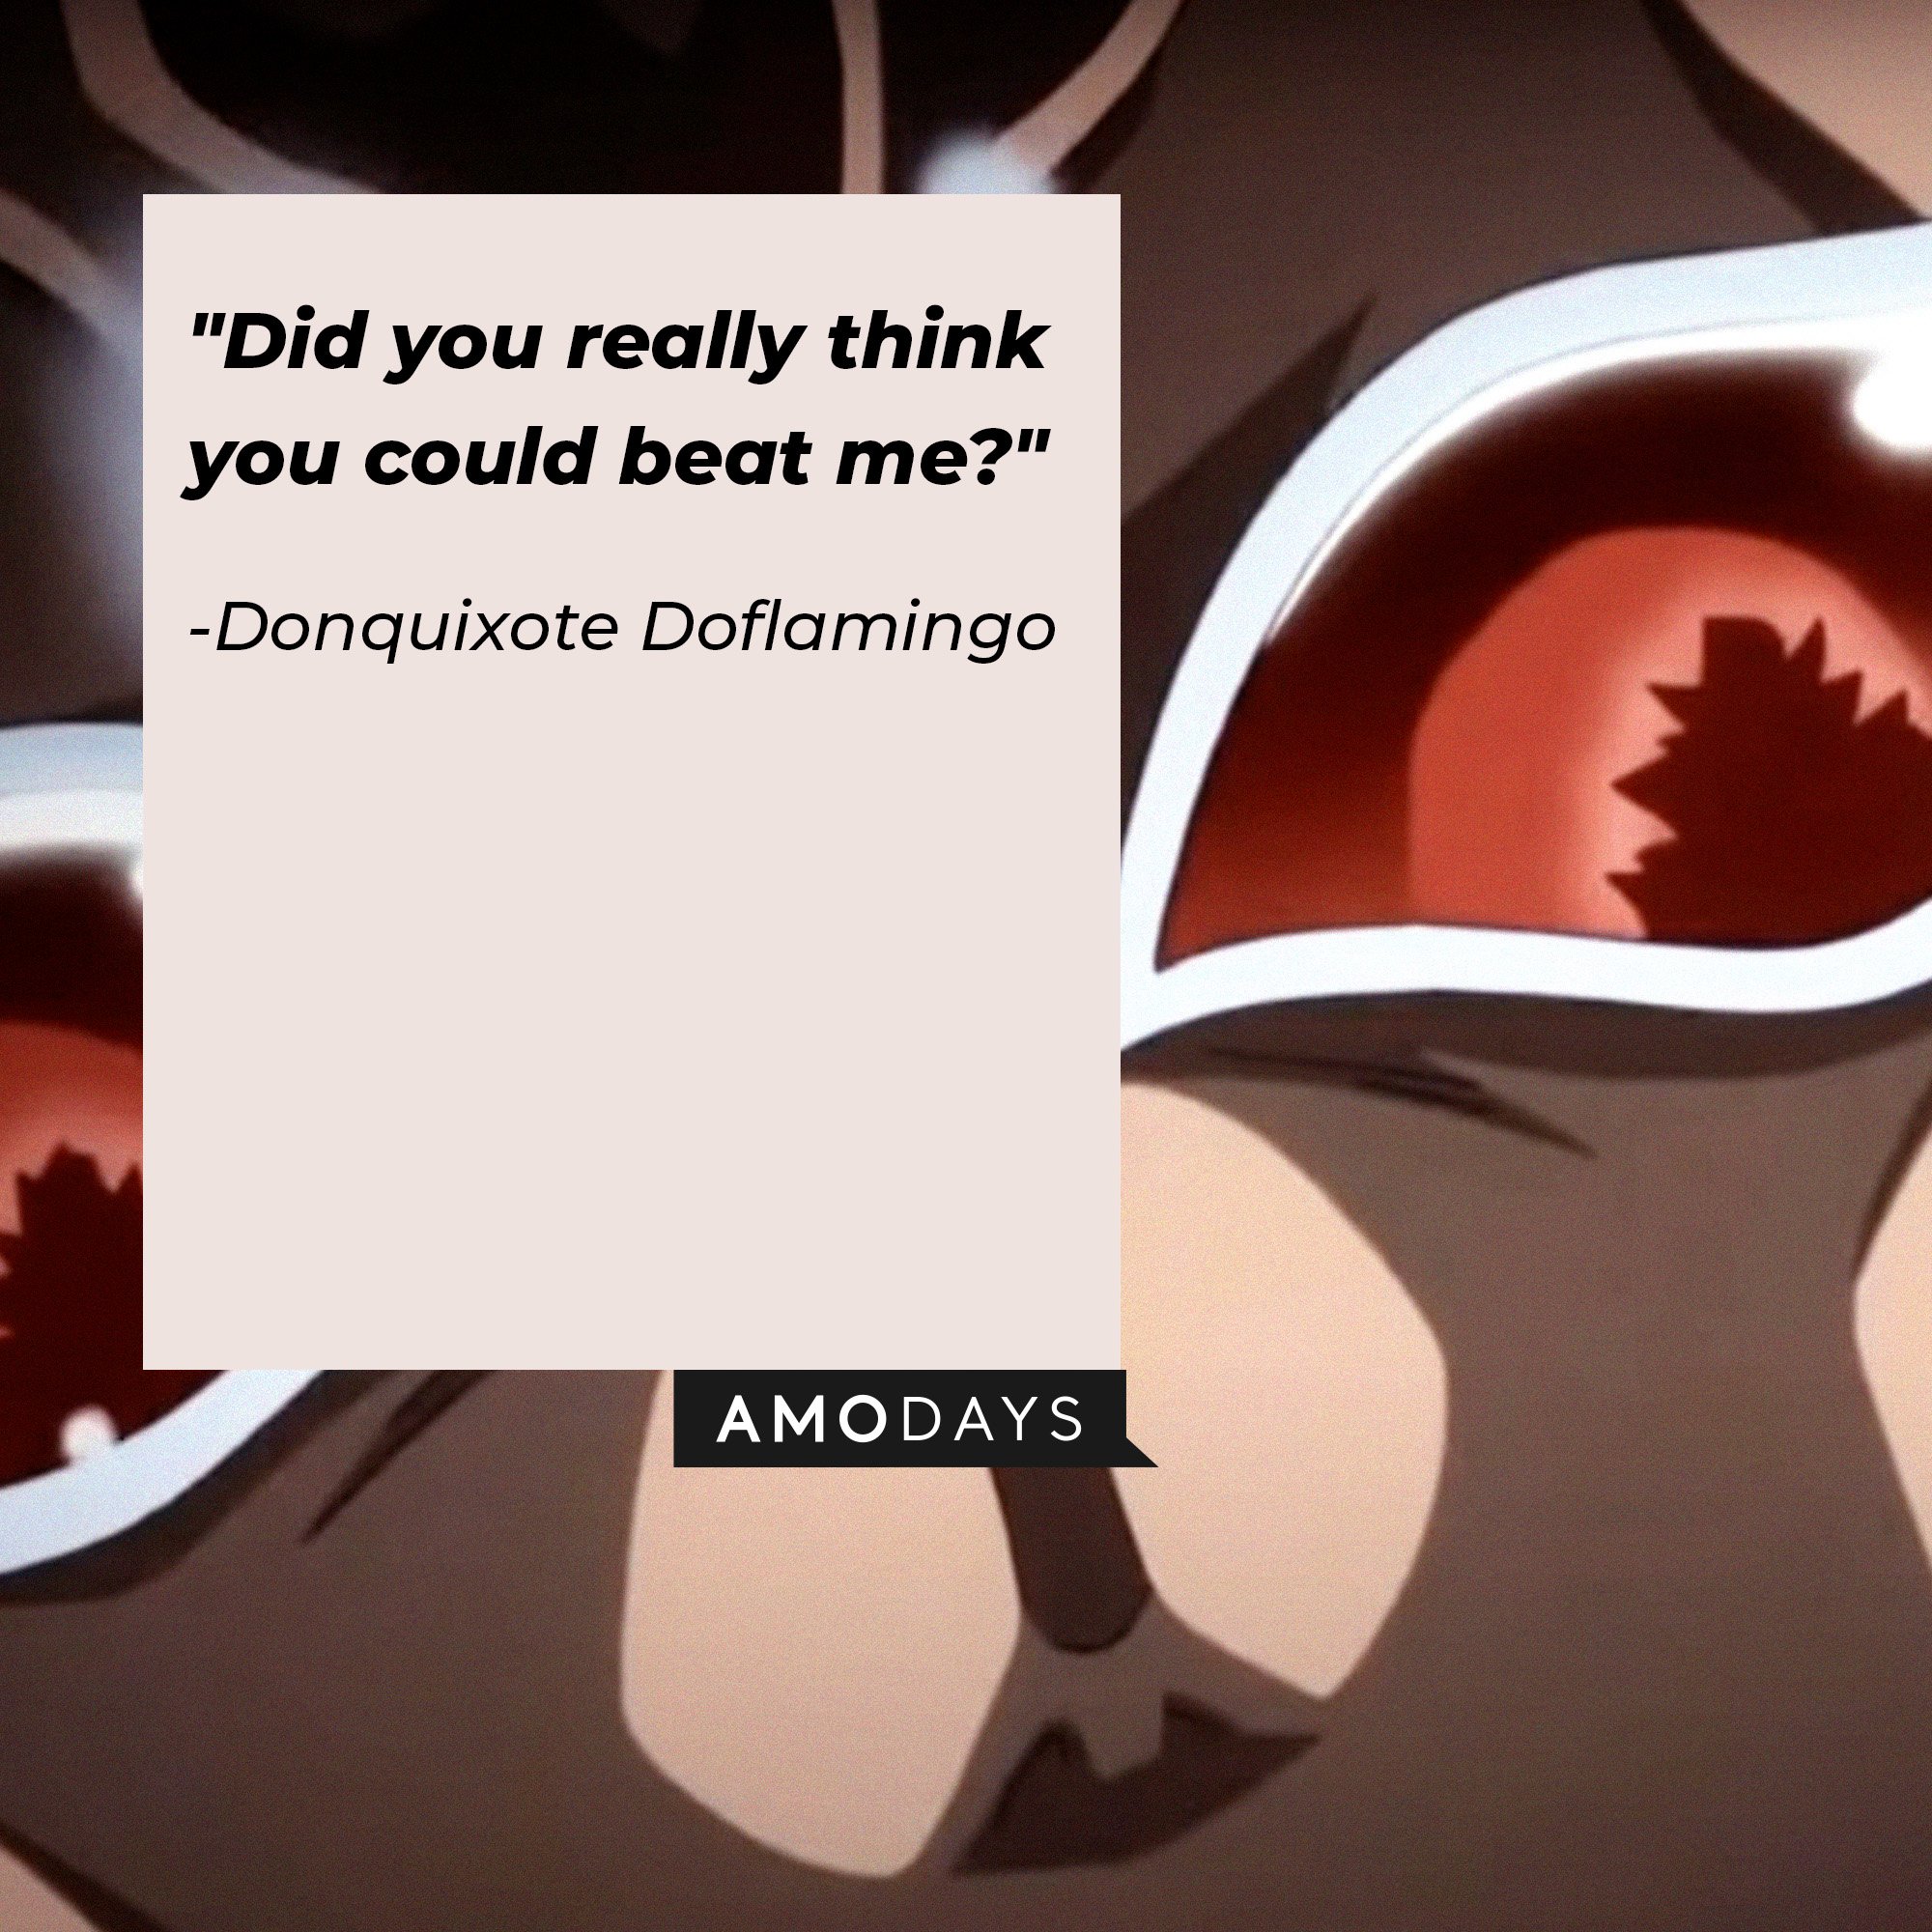 Donquixote Doflamingo’s quote: "Did you really think you could beat me?" | Image: AmoDays